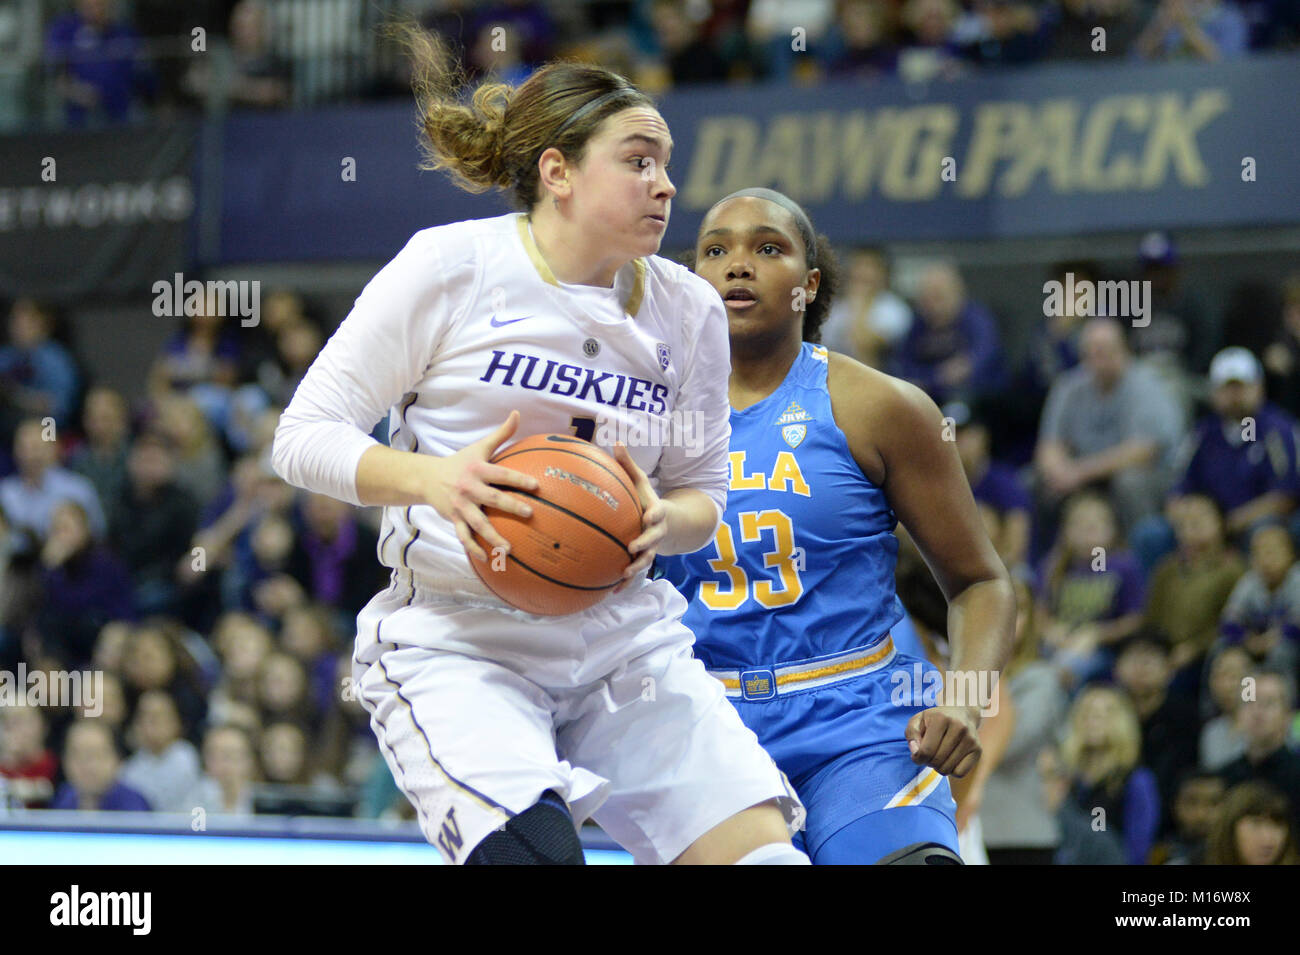 Seattle, WA, USA. 26th Jan, 2018. UW center Hannah Johnson (1) drives to the basket against UCLA's Lauryn Miller (33) during a PAC12 womens basketball game between the Washington Huskies and UCLA Bruins. The game was played at Hec Ed Pavilion in Seattle, WA. Jeff Halstead/CSM/Alamy Live News Stock Photo